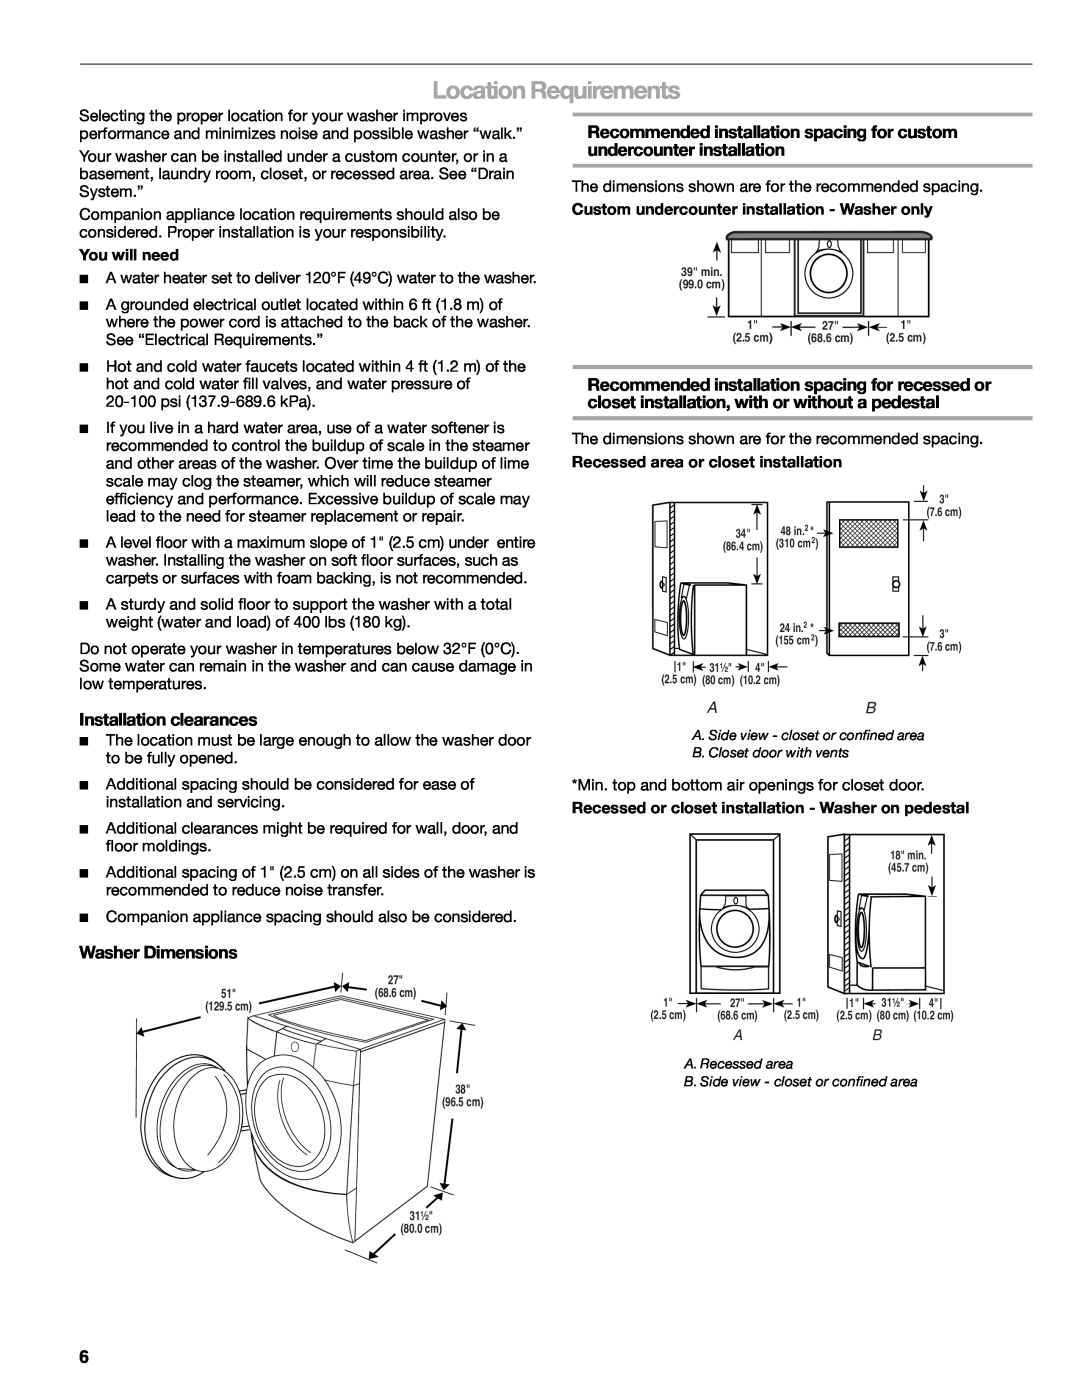 Kenmore W10133487A manual Location Requirements, Installation clearances, Washer Dimensions 